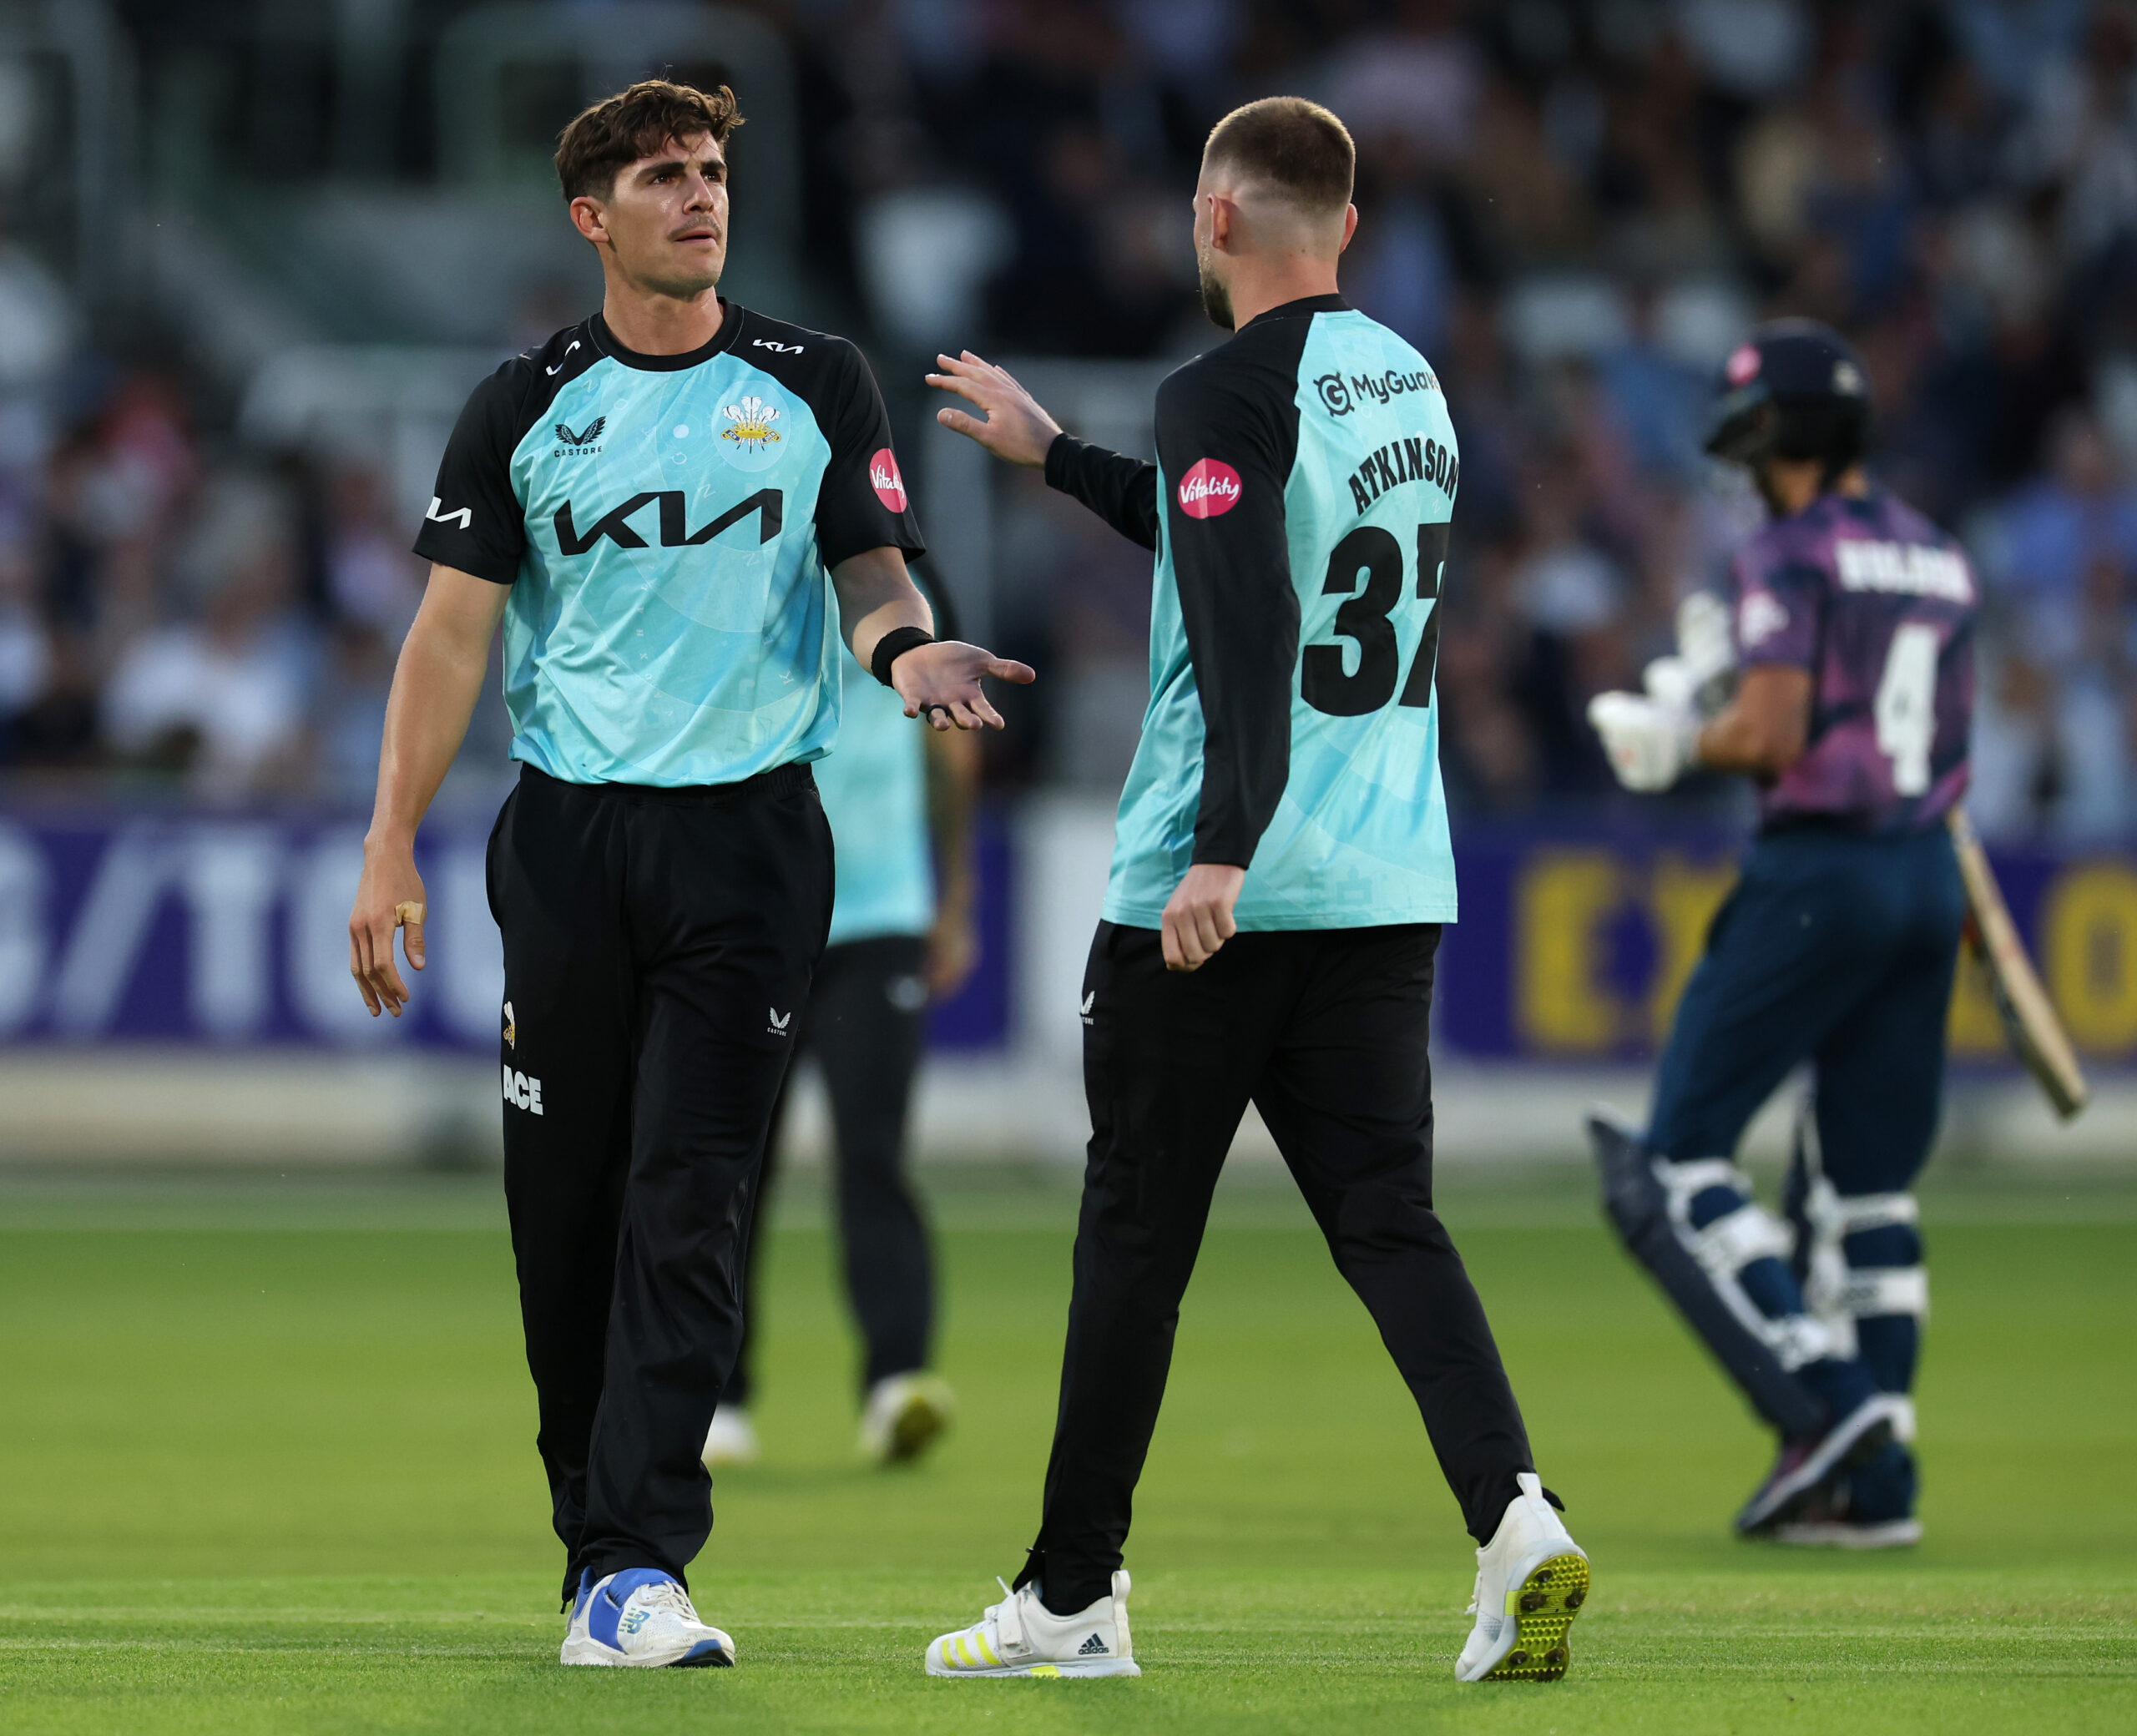 Abbott stuns Middlesex to give Surrey London derby victory